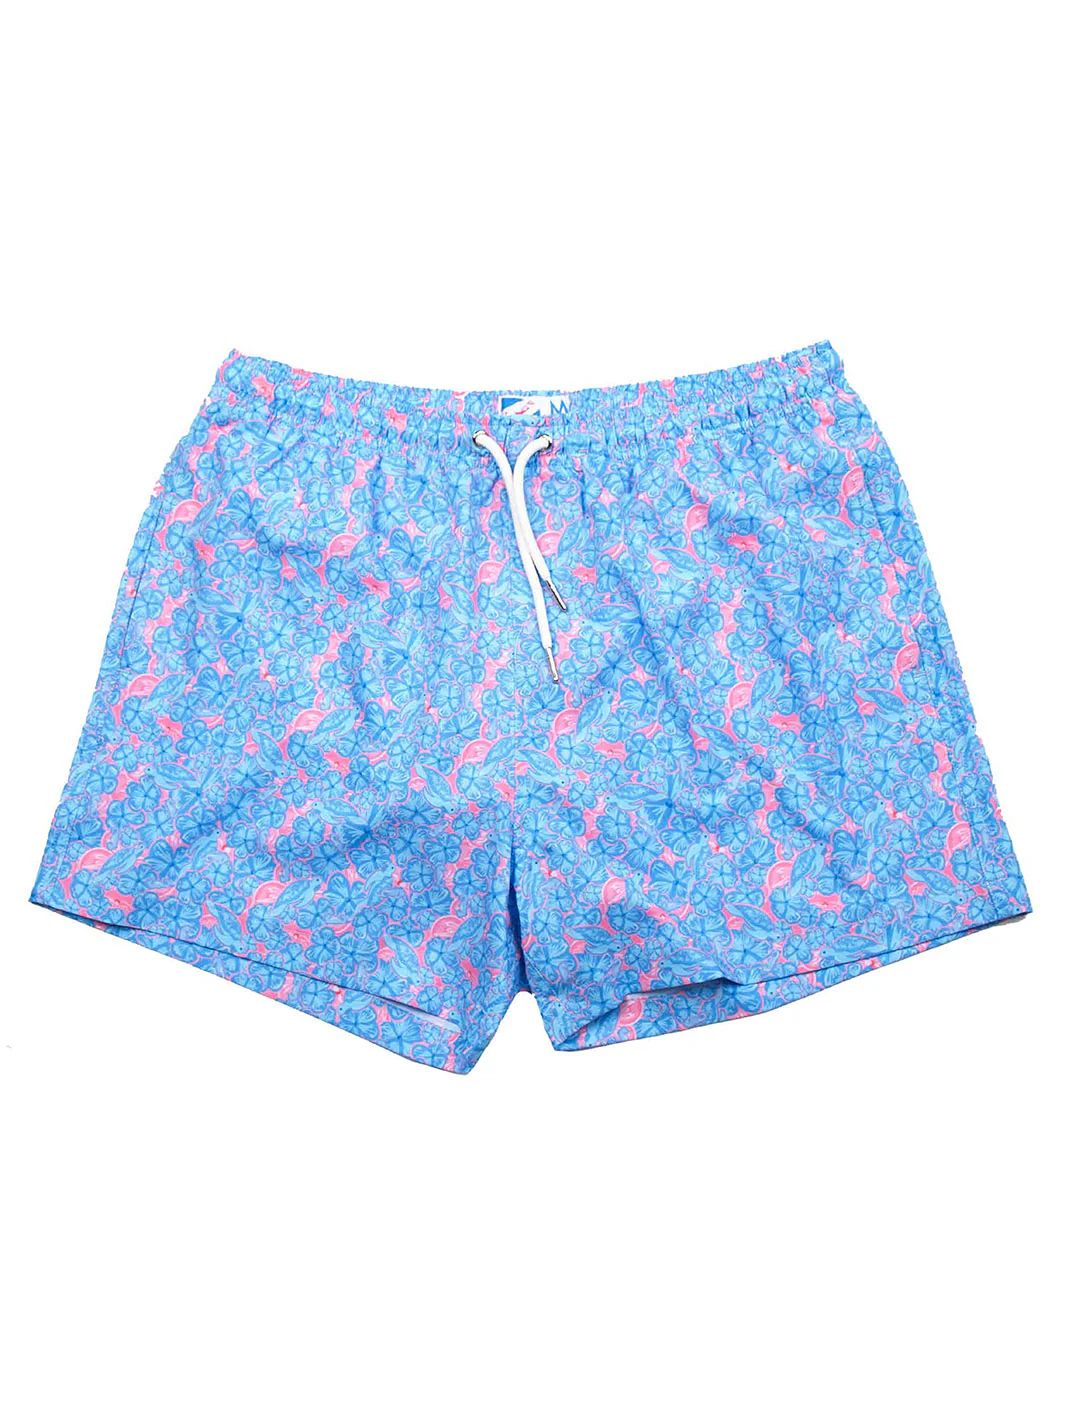 Bermies Men's Floral Print Cropped Swim Trunks in Blue XL Lord & Taylor | Lord & Taylor